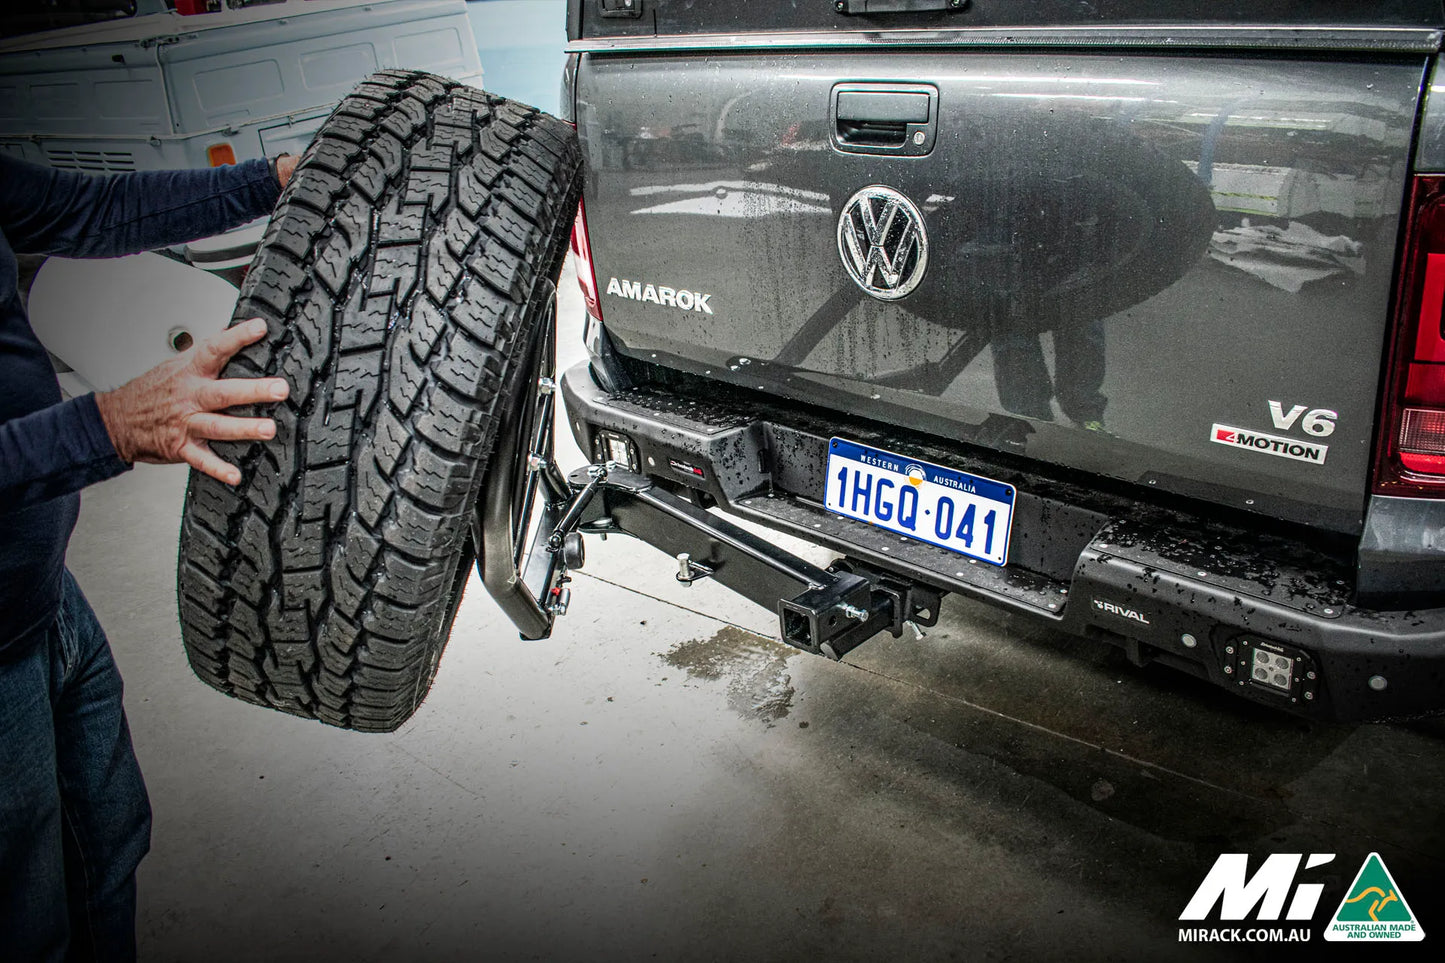 Maximize your VW Amarok's potential: Open swinging carrier on tow hitch unlocks extra cargo space and improves maneuverability.